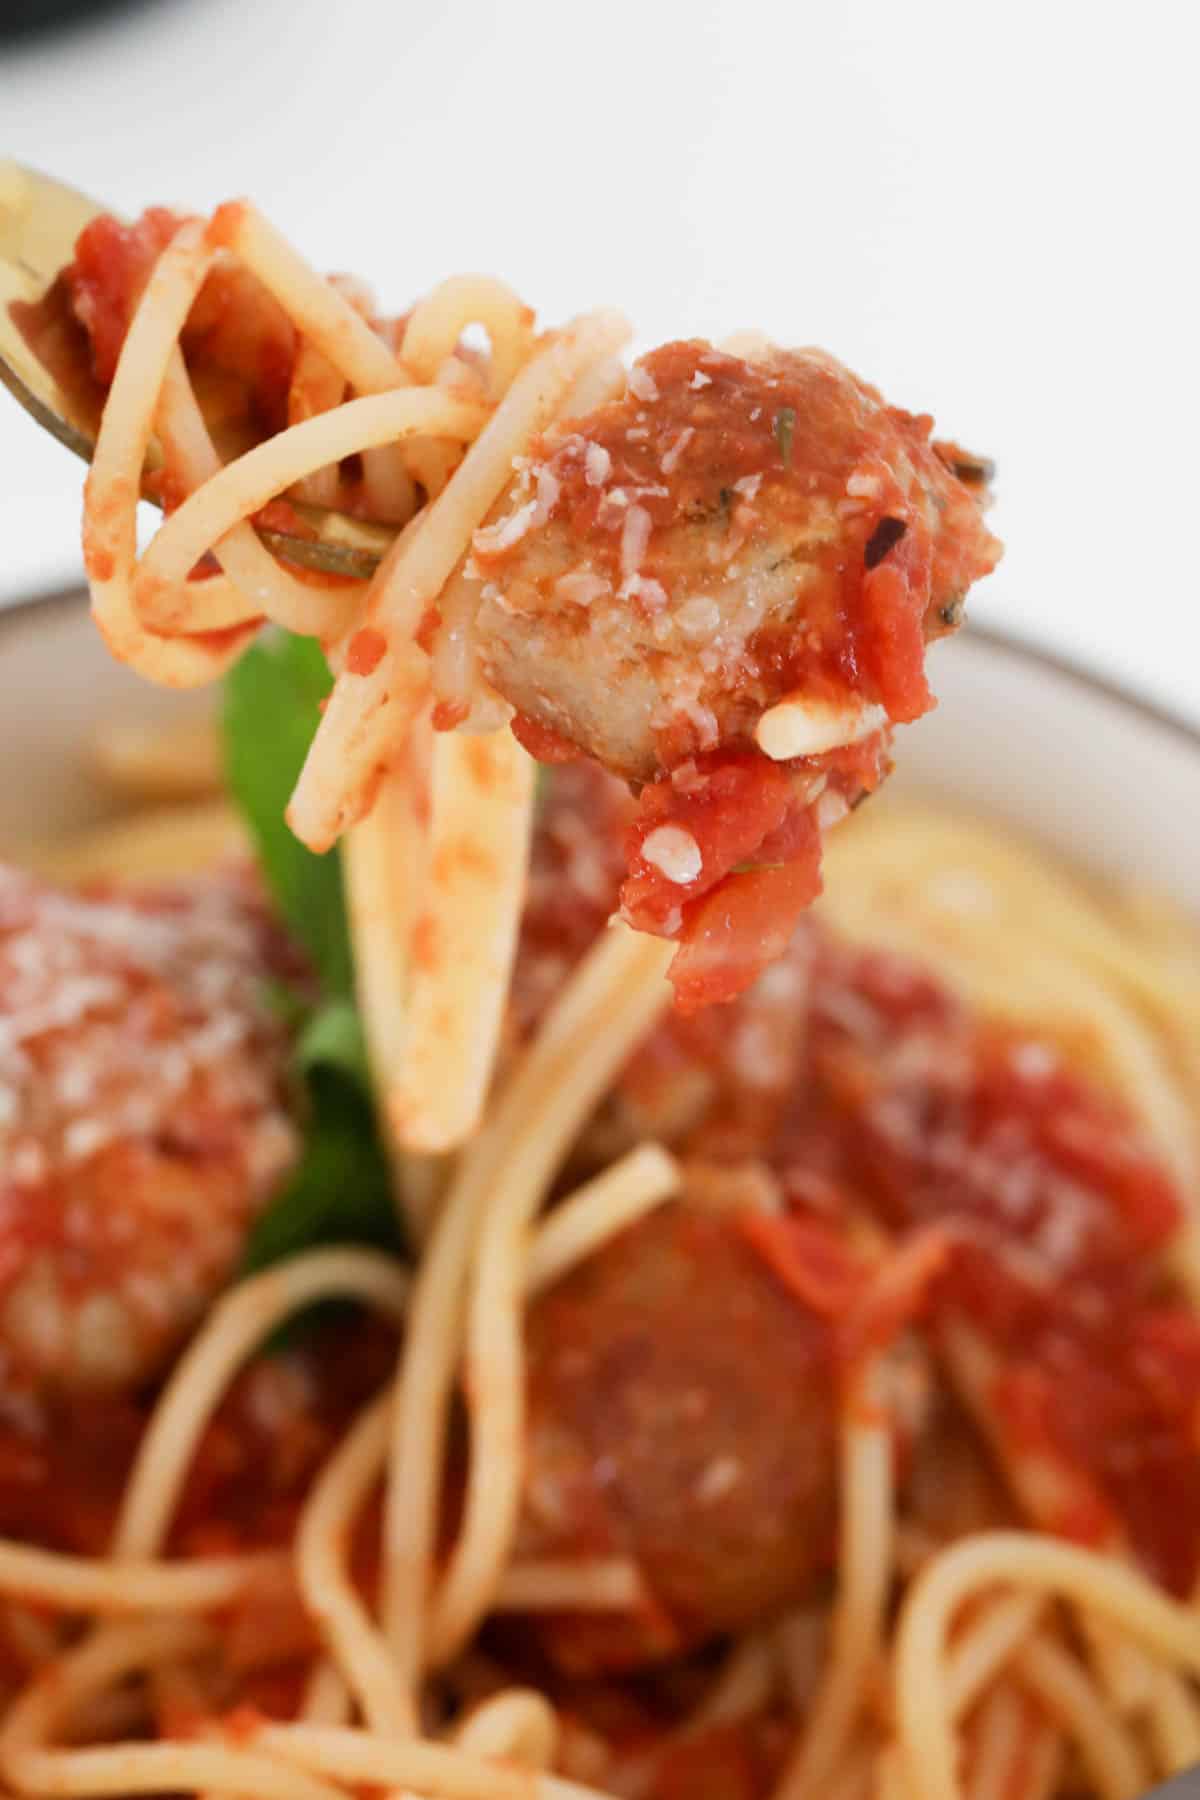 A fork holding a sausage meatball above a bowl.